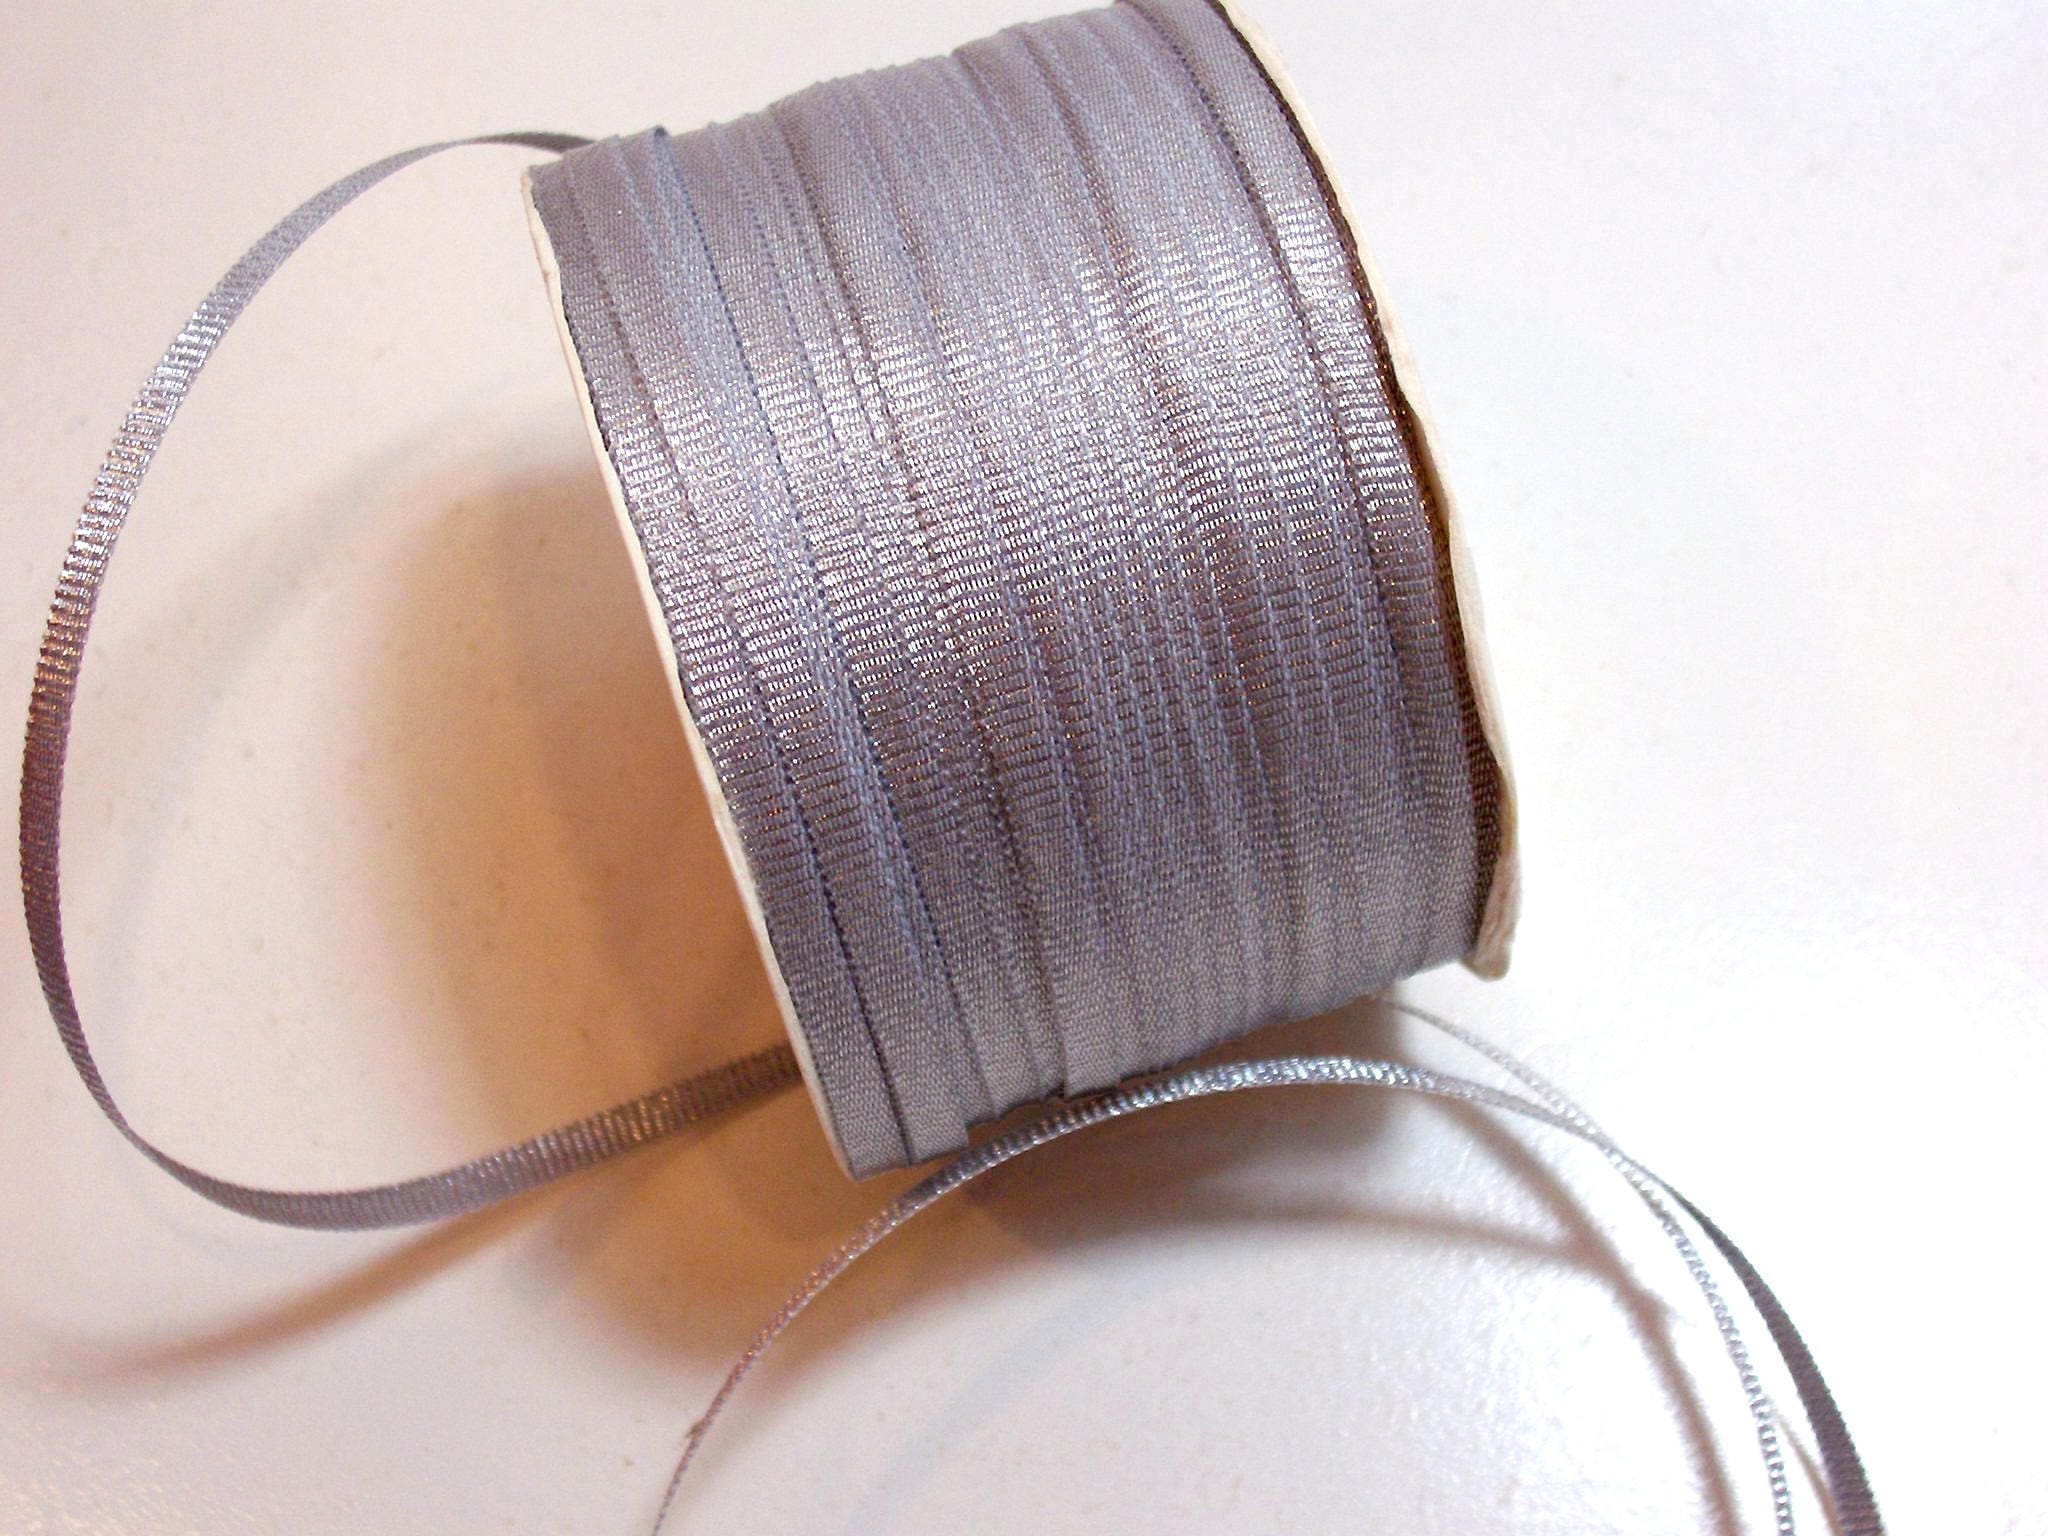 VATIN 2 inches Solid Grosgrain Ribbon Spool -25 Yards, Great for